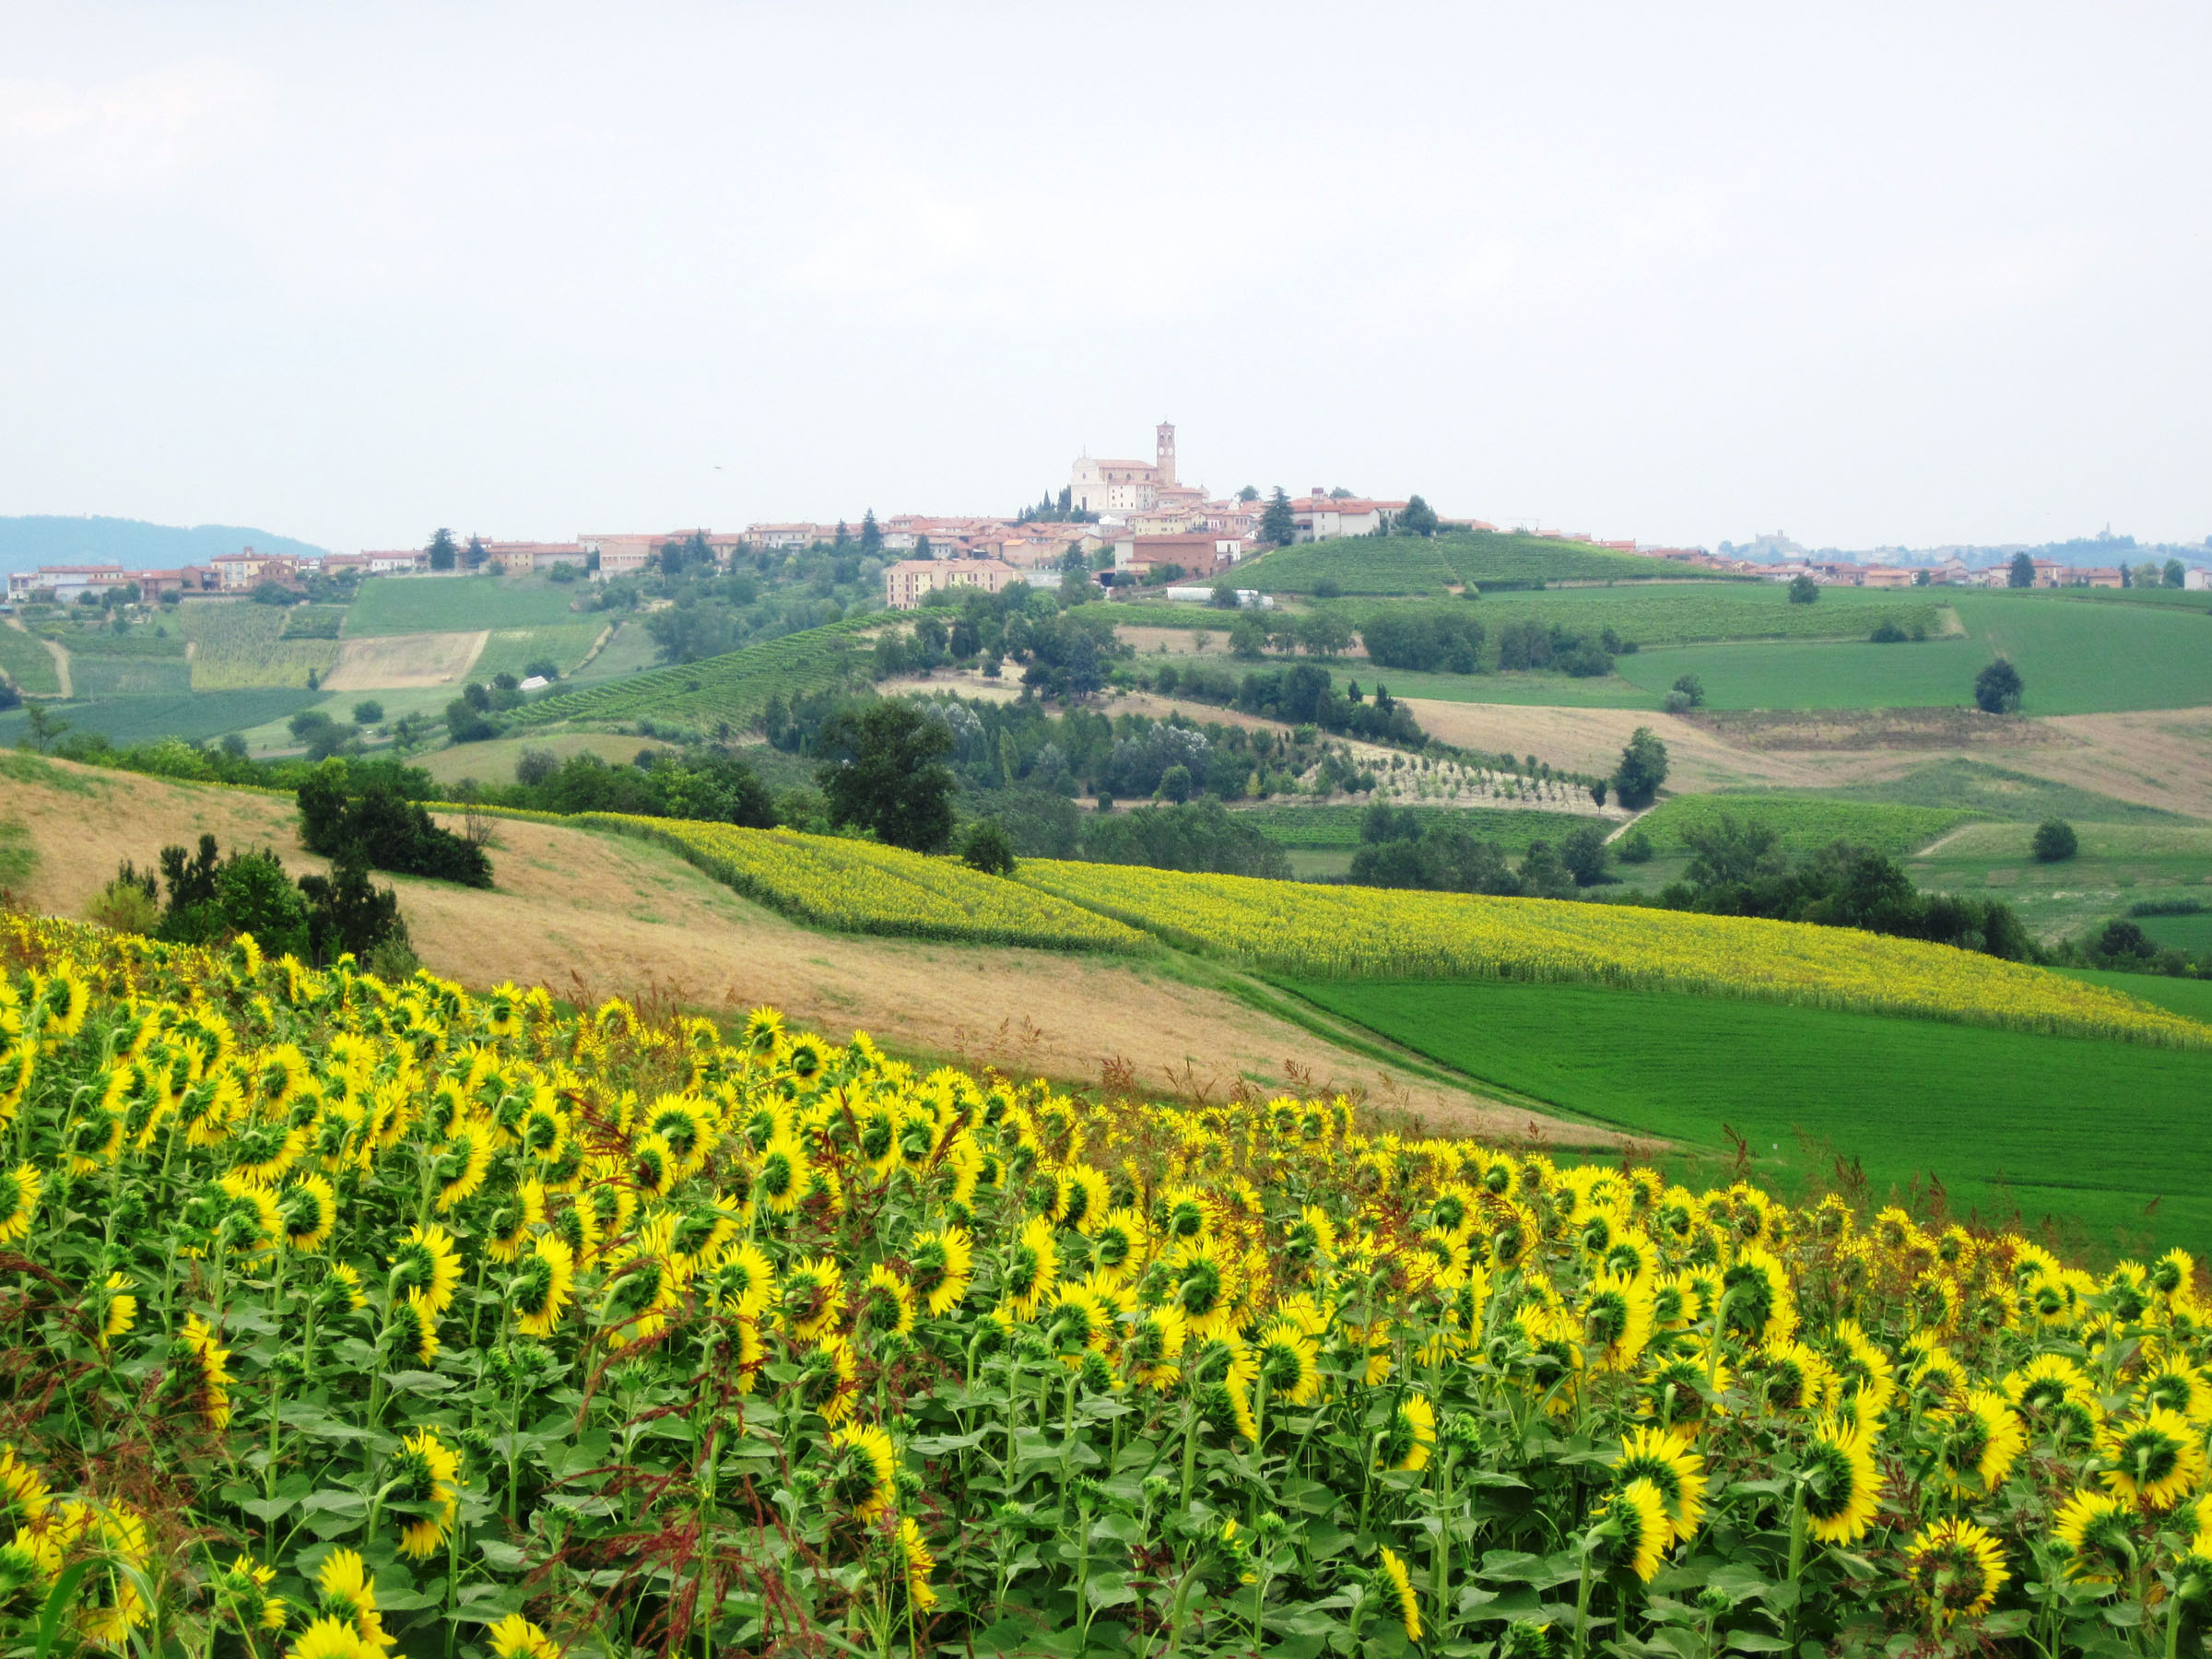 The castles of Monferrato, each guarding a unique medieval village, the famed thermal waters of Acqui, and the hypnotic geometry of the Nizza hills are among the many highlights on our glorious route.